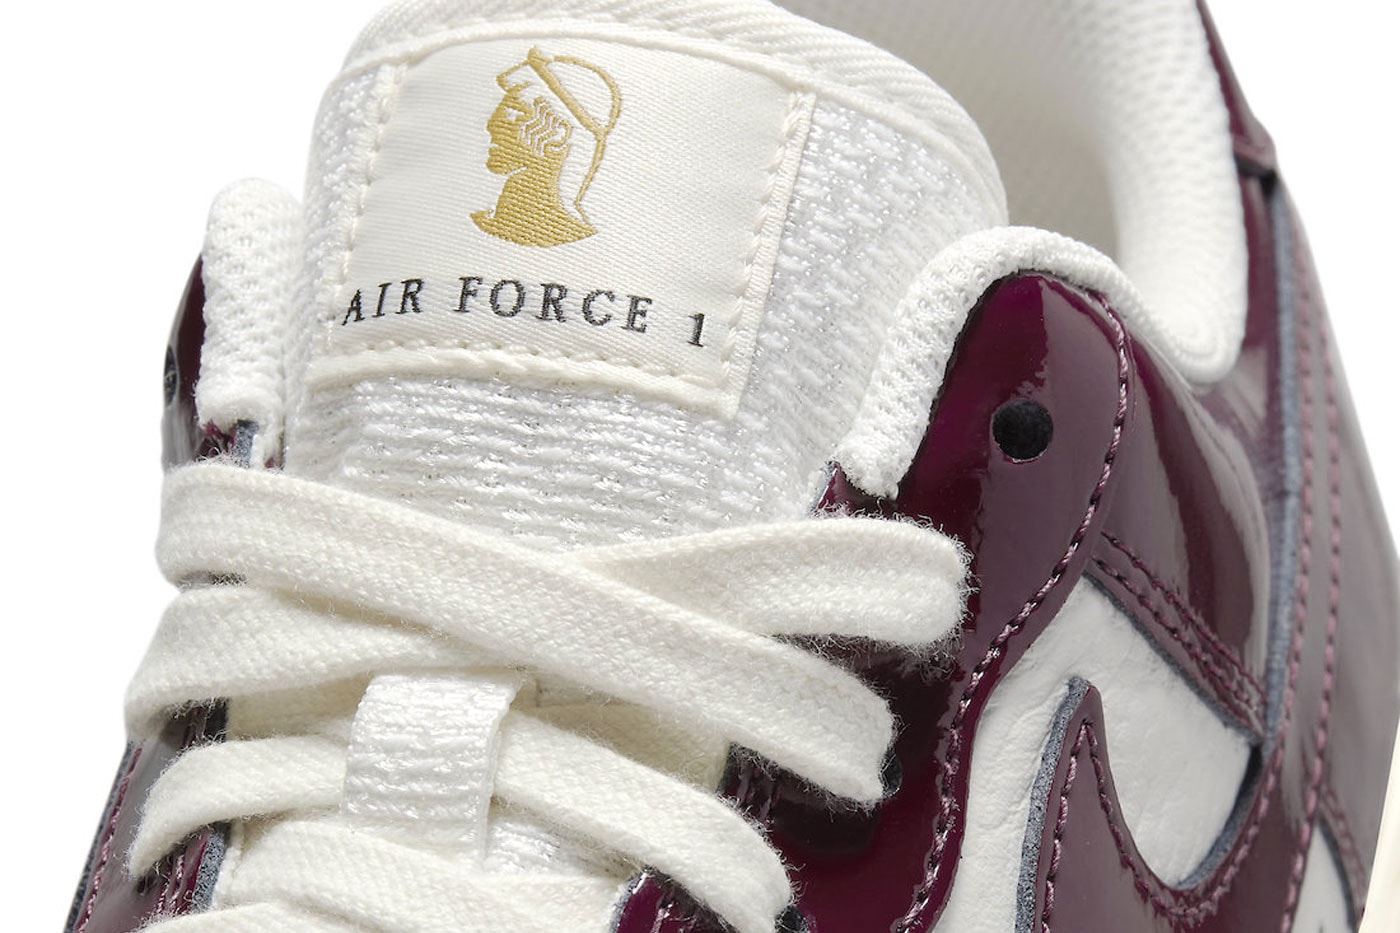 Nike Air Force 1 Low Ancient Rome Release Info dq8583 100 roman empire bust gold figurehead burgundy patent leather white yellowed aged sole unit release date info price